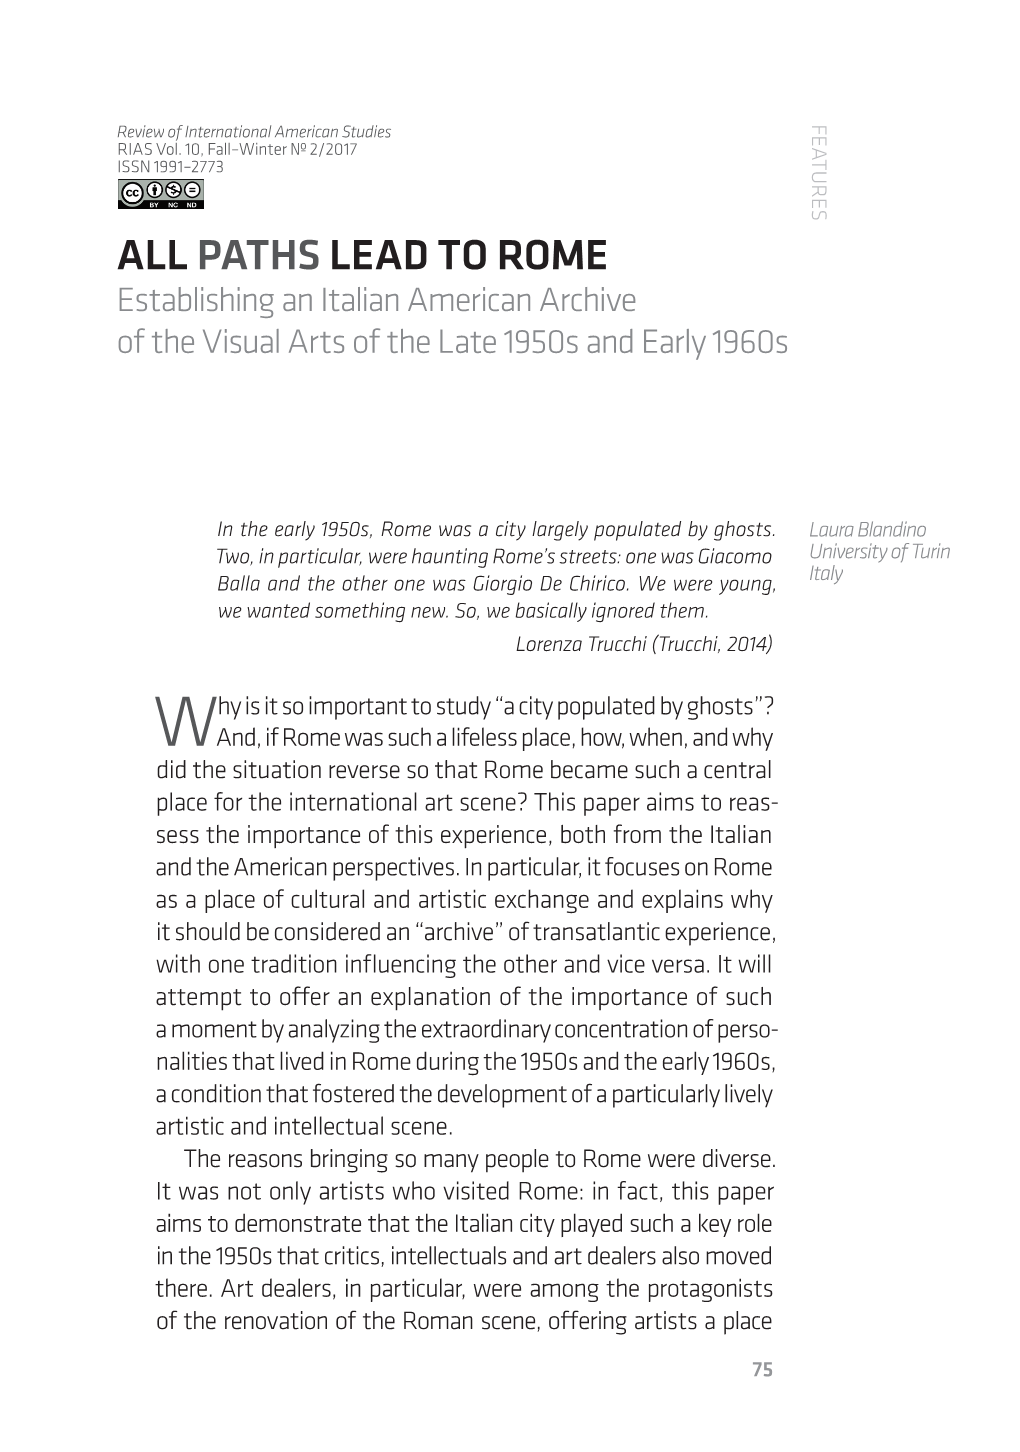 PATHS LEAD to ROME Establishing an Italian American Archive of the Visual Arts of the Late 1950S and Early 1960S